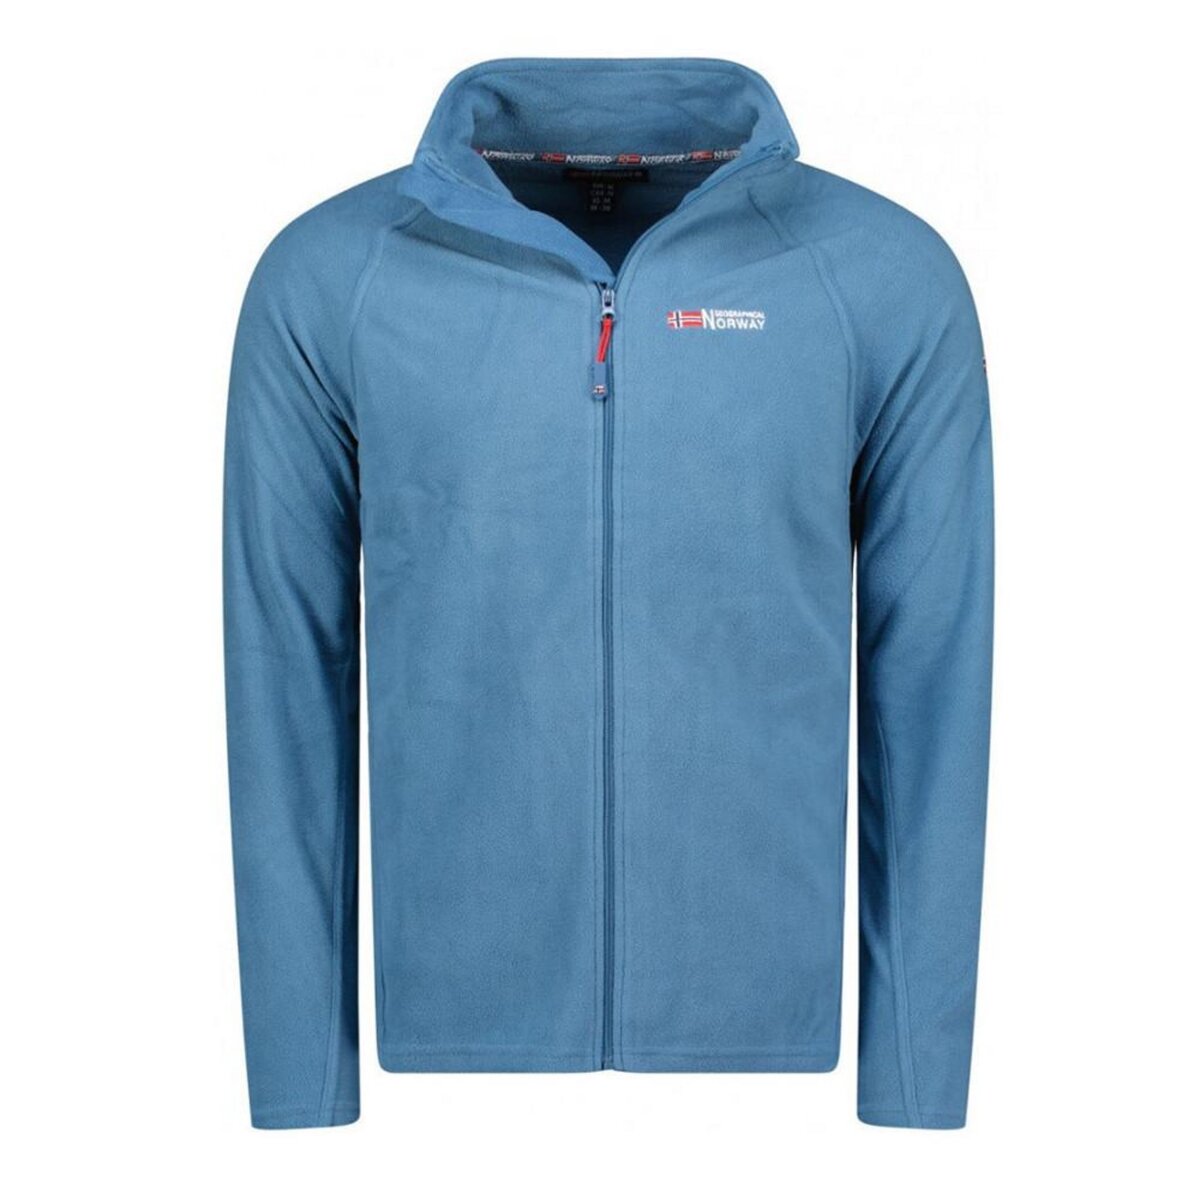 GEOGRAPHICAL NORWAY Veste Polaire Bleu Homme Geographical Norway Tug